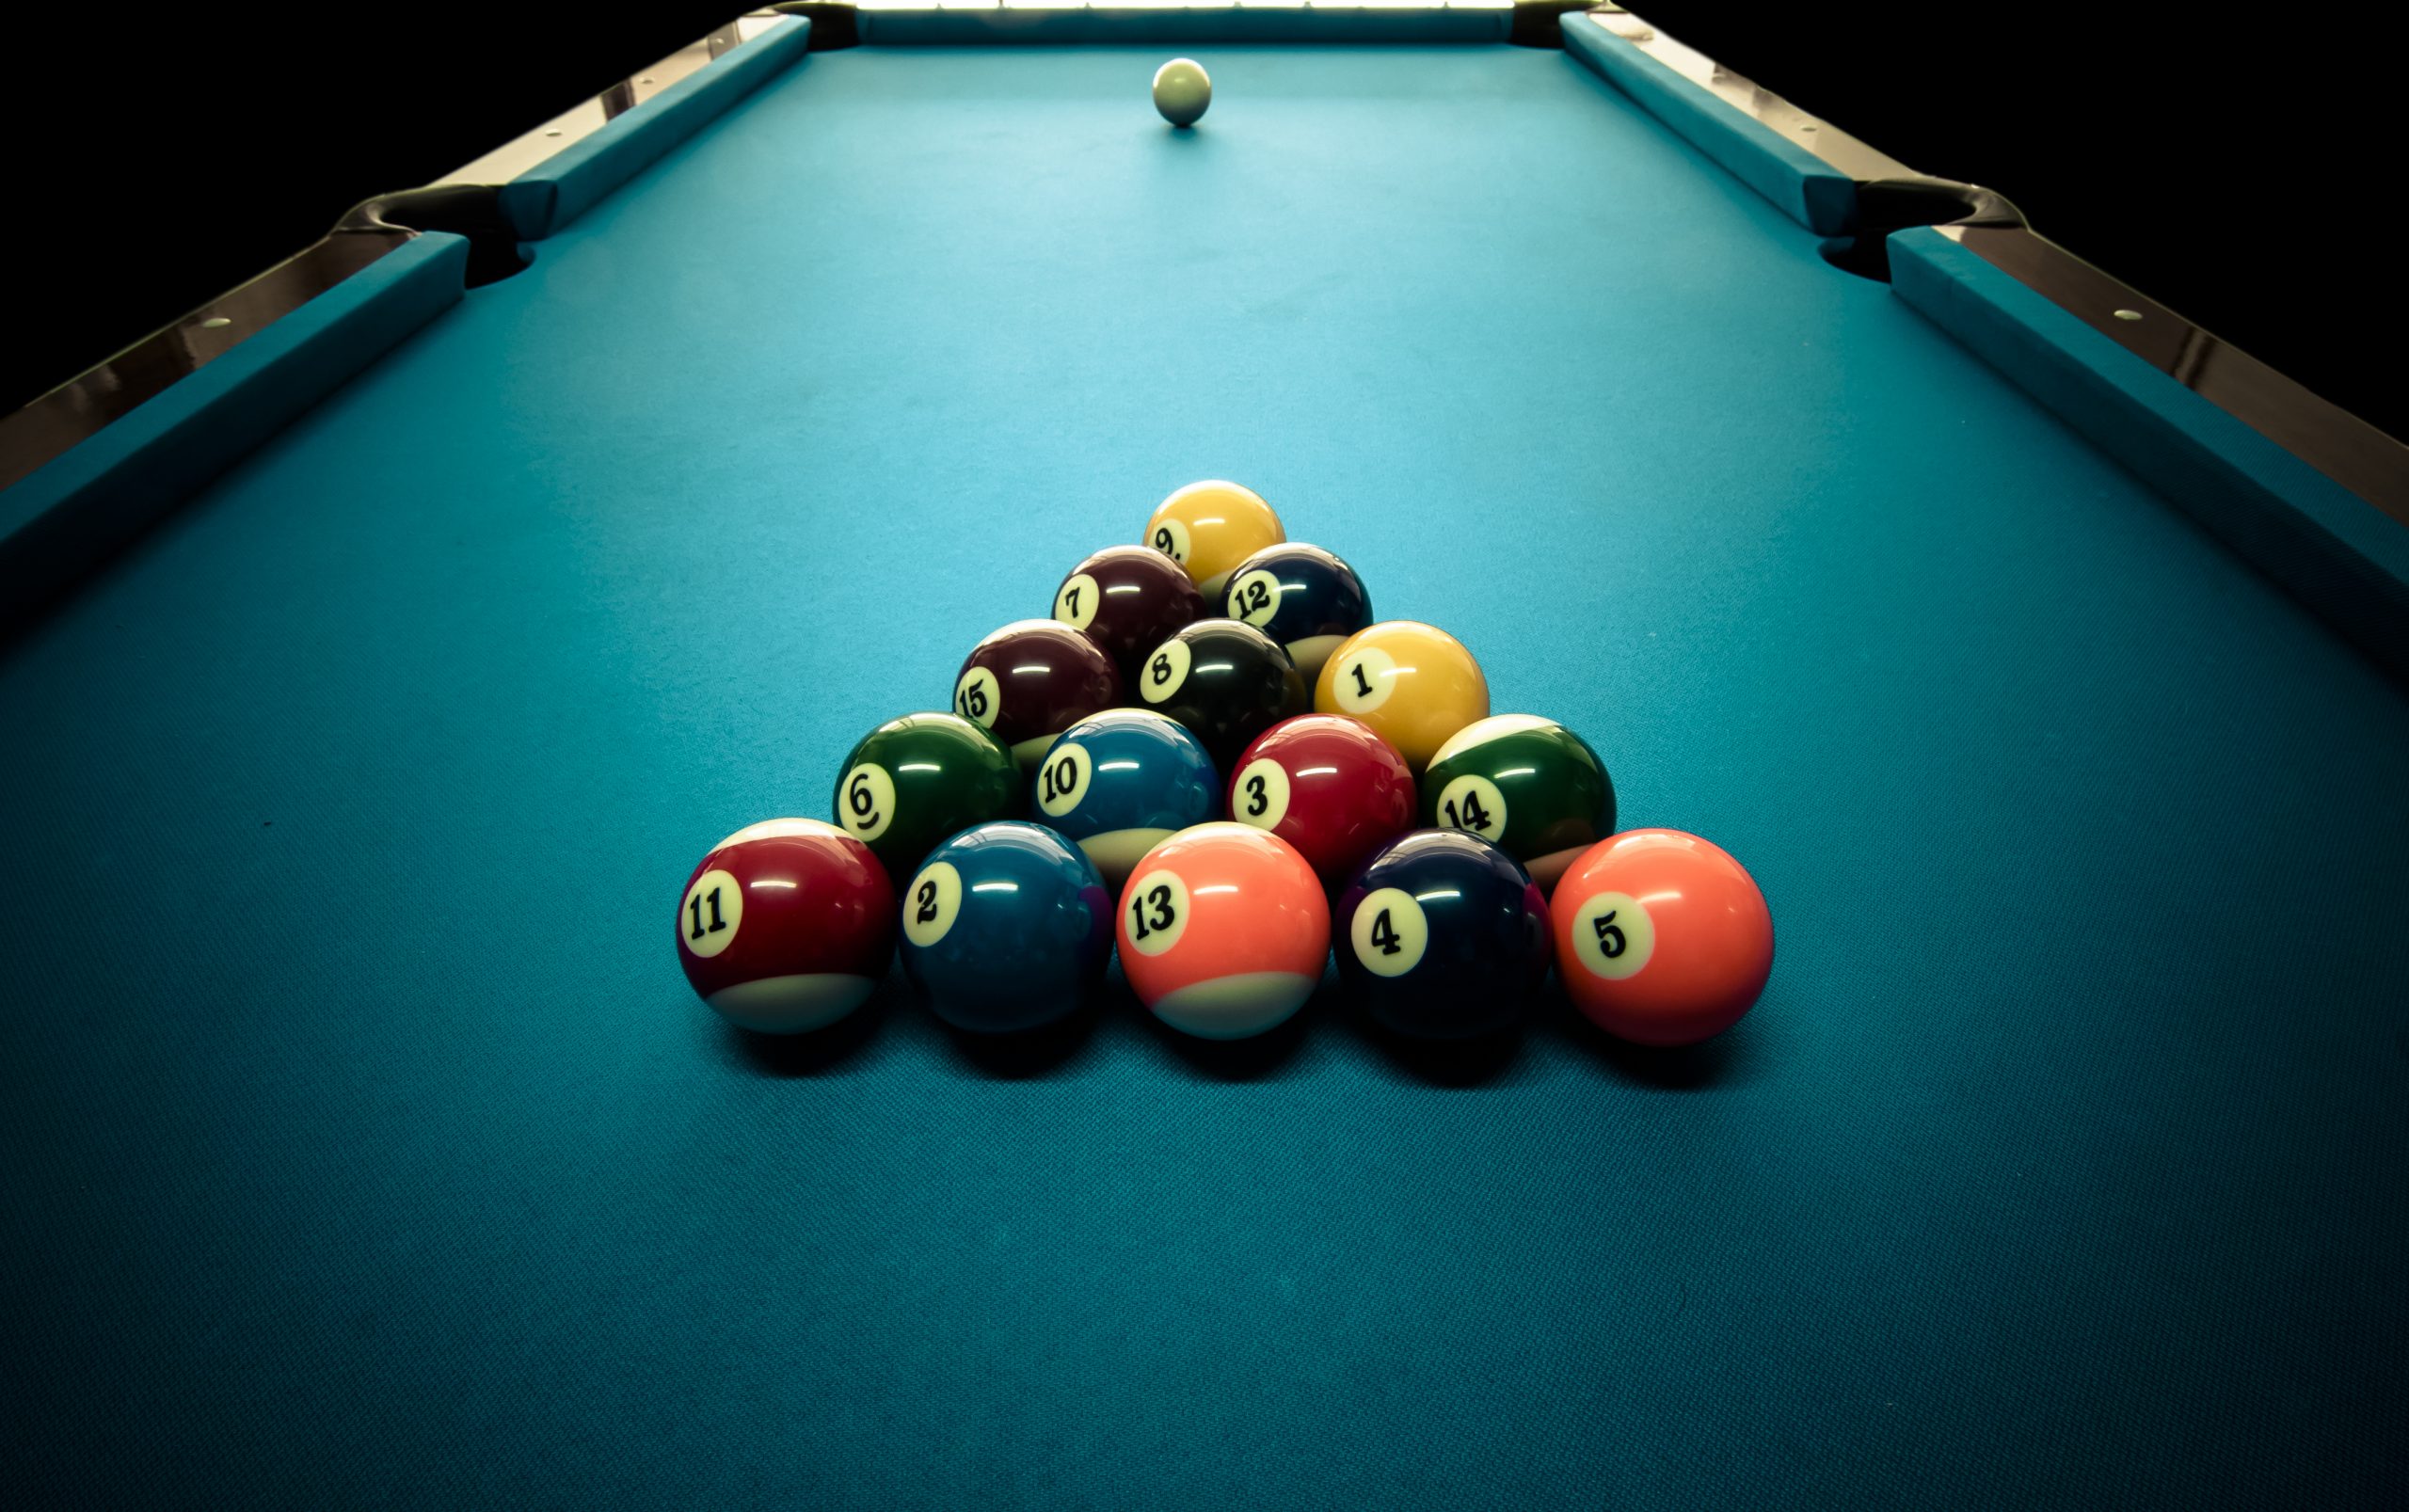 8 ball pool online games